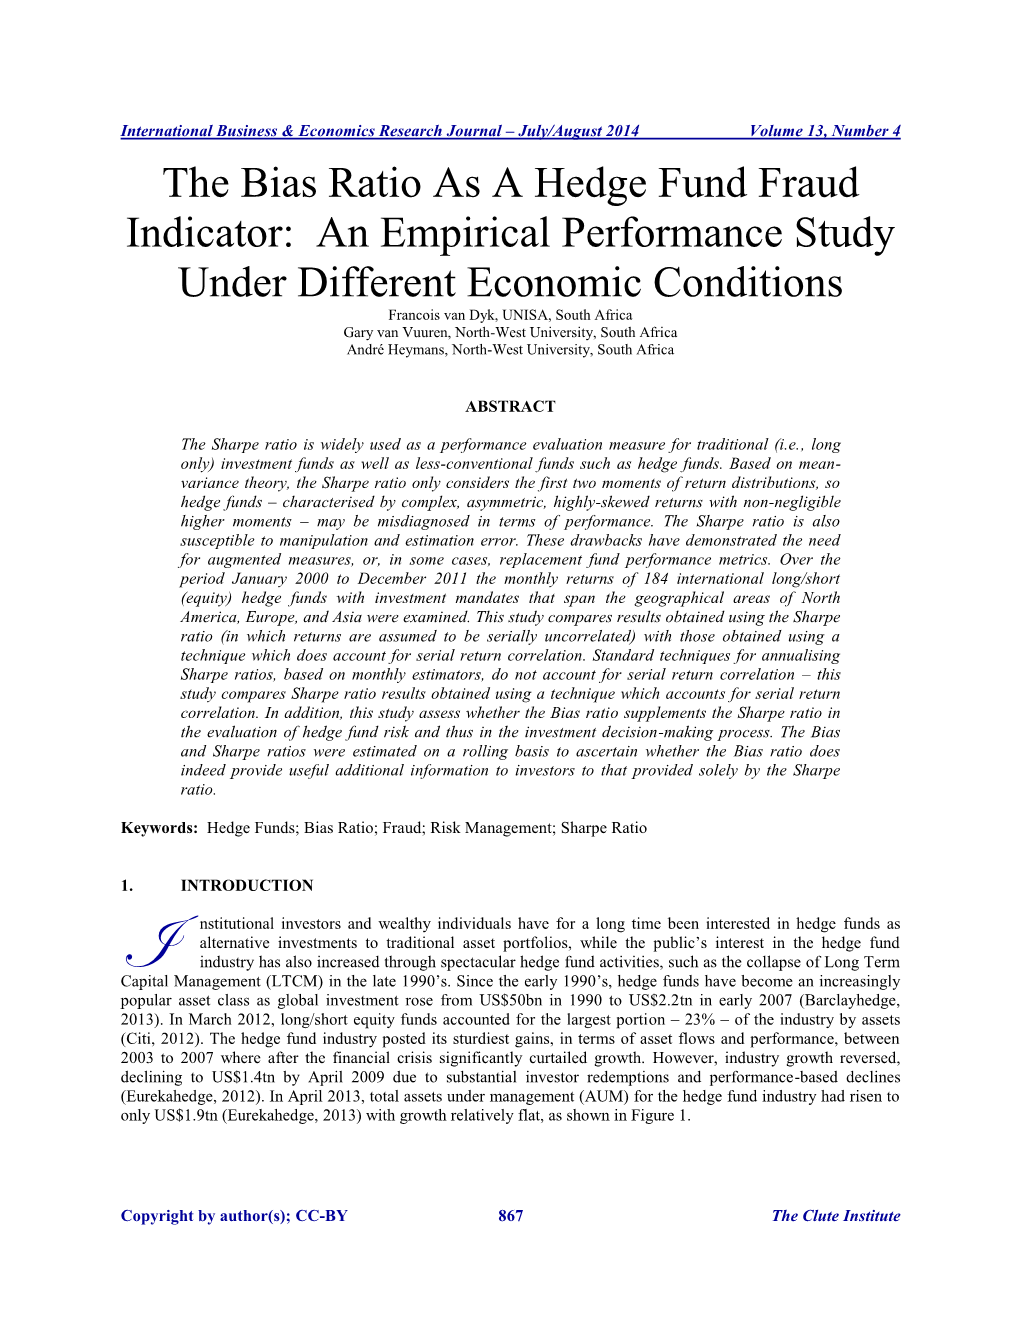 The Bias Ratio As a Hedge Fund Fraud Indicator